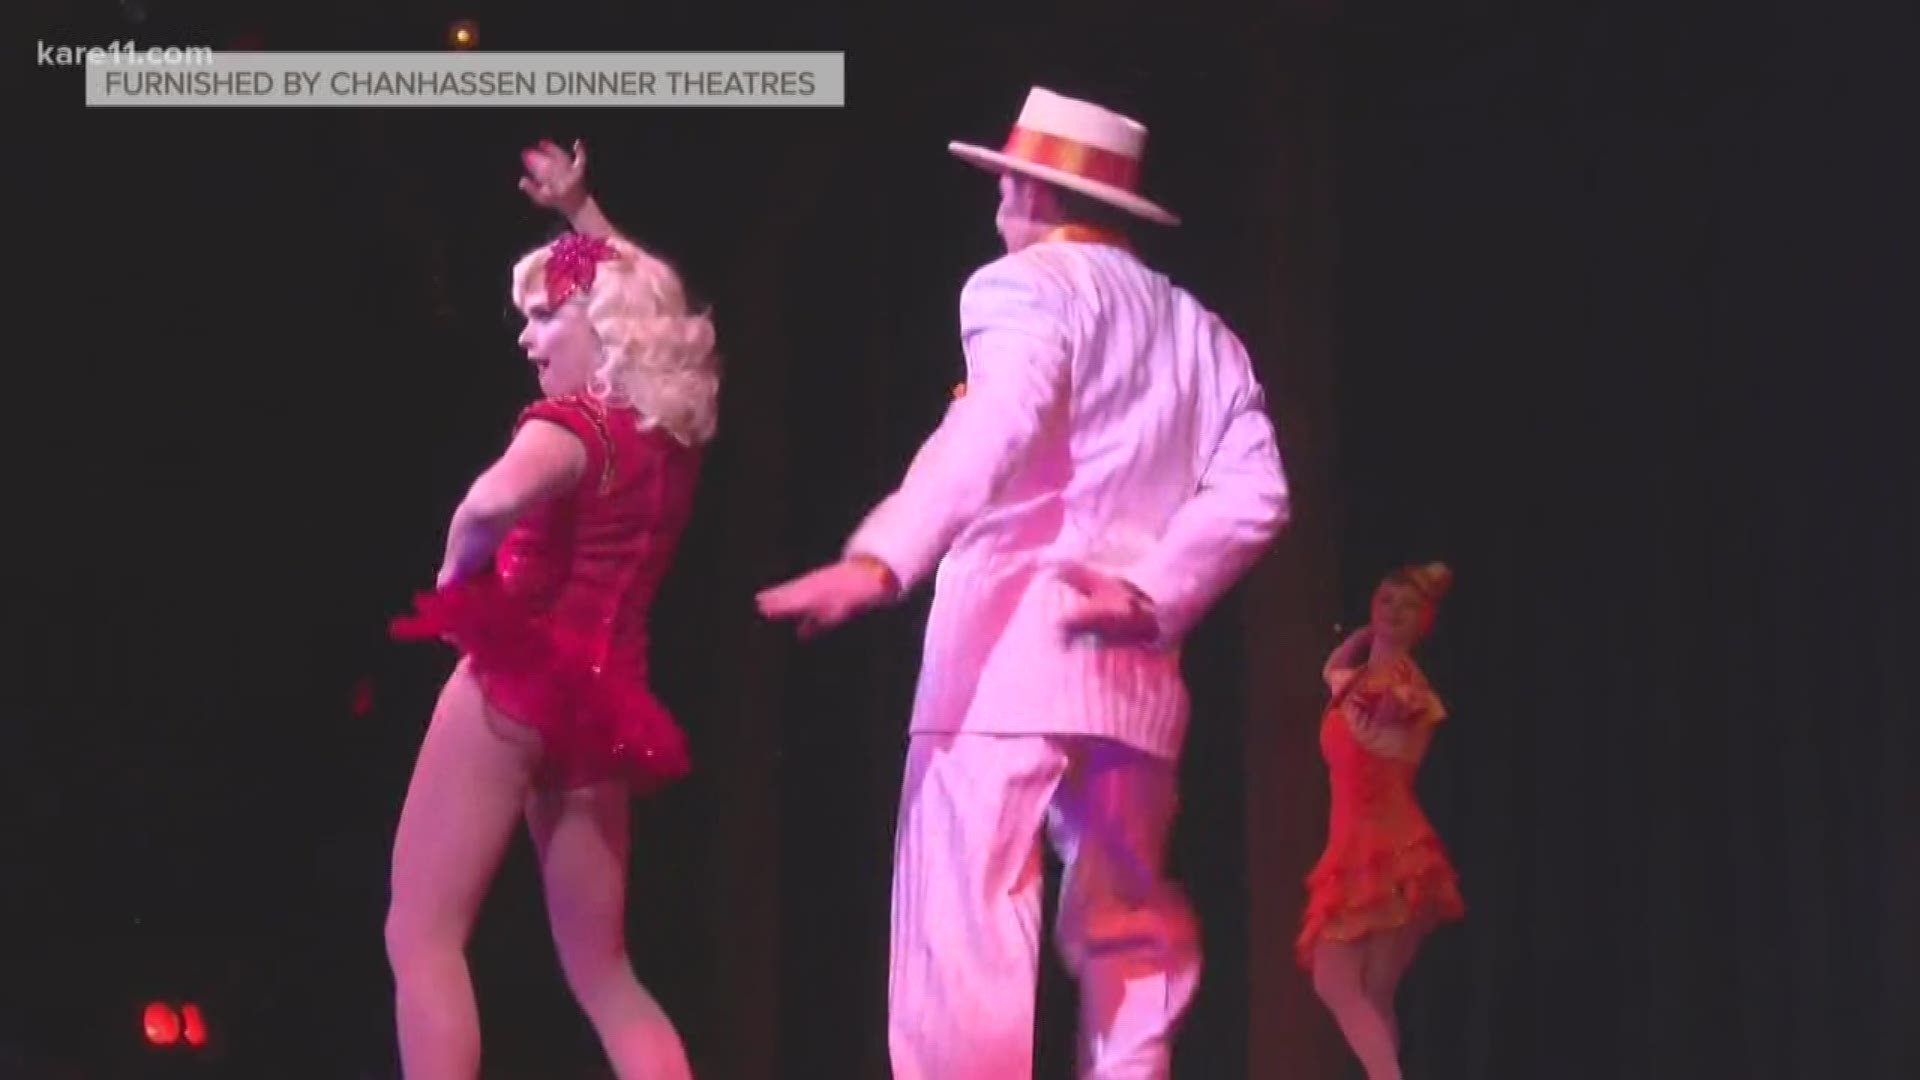 Hear from some of the stars! Chanhassen Dinner Theatres presents the Regional Premiere of Irving Berlin's HOLIDAY INN!
https://kare11.tv/2yMj7Fc